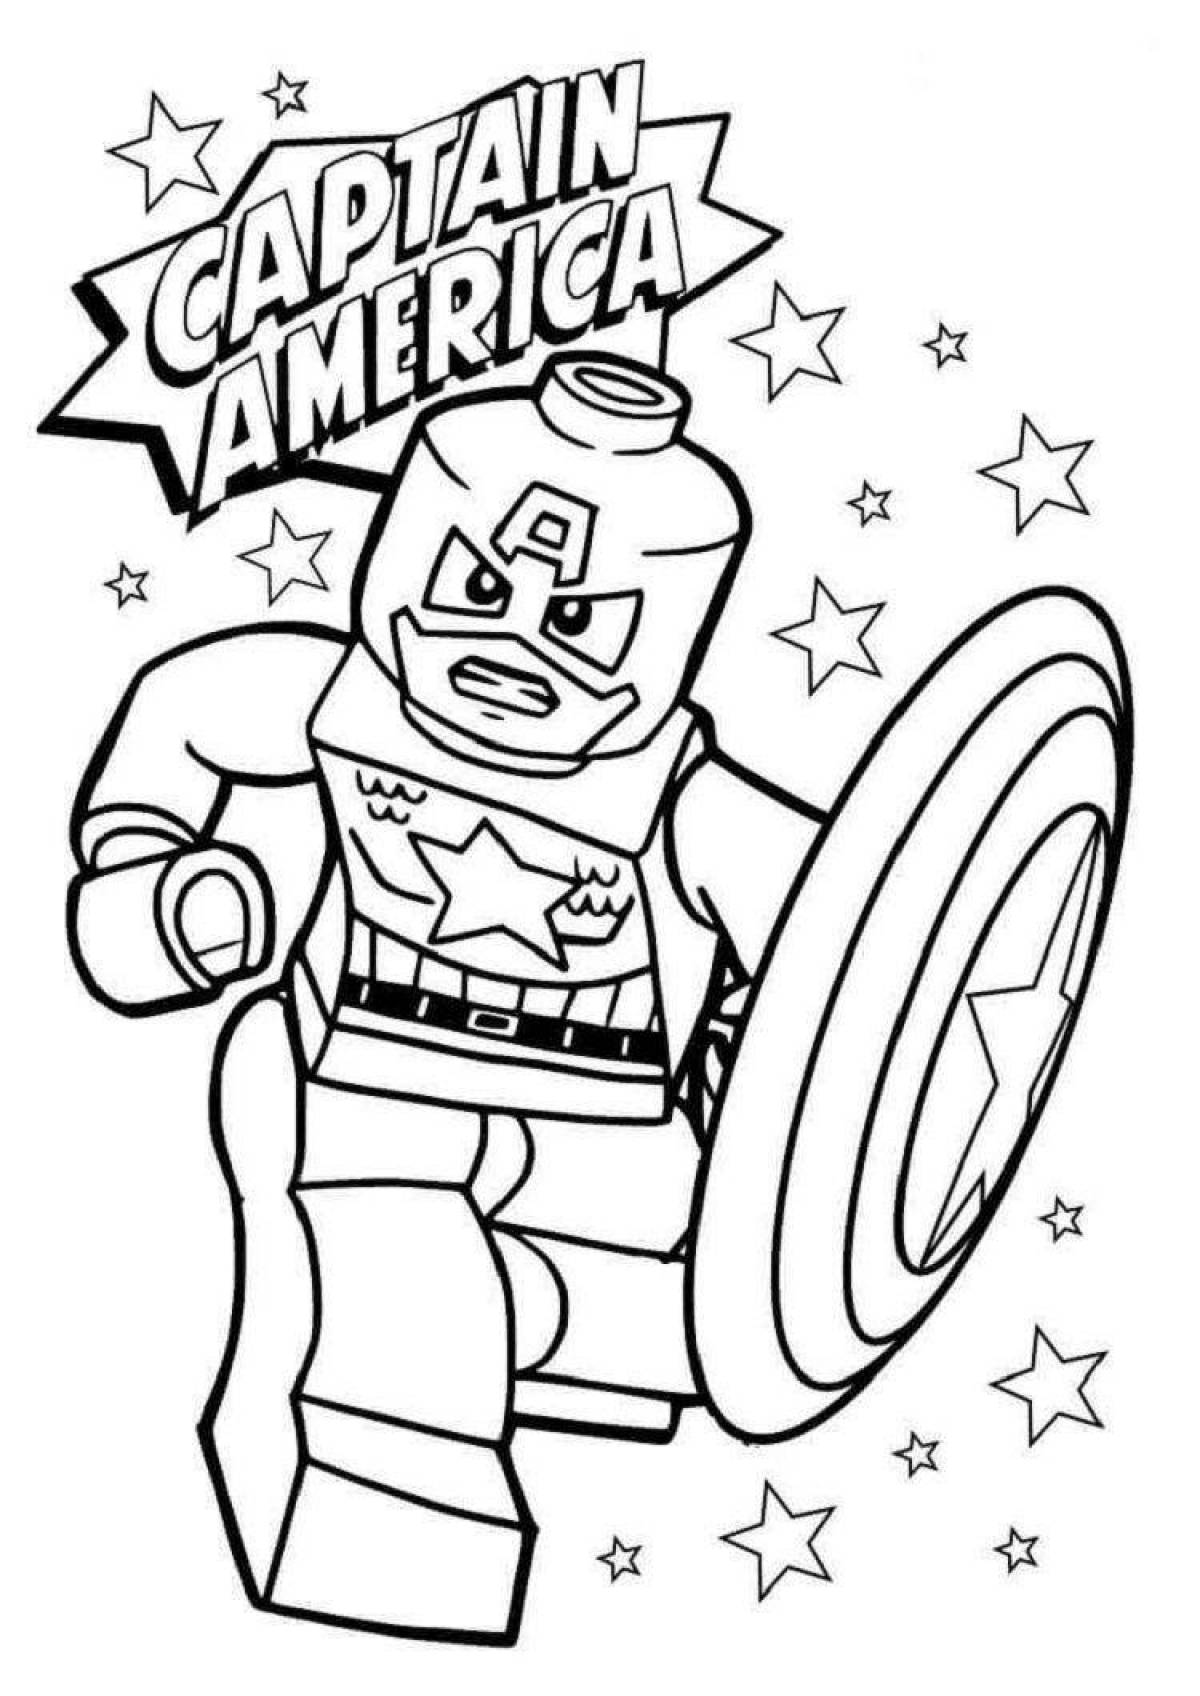 Tempting lego flash coloring page